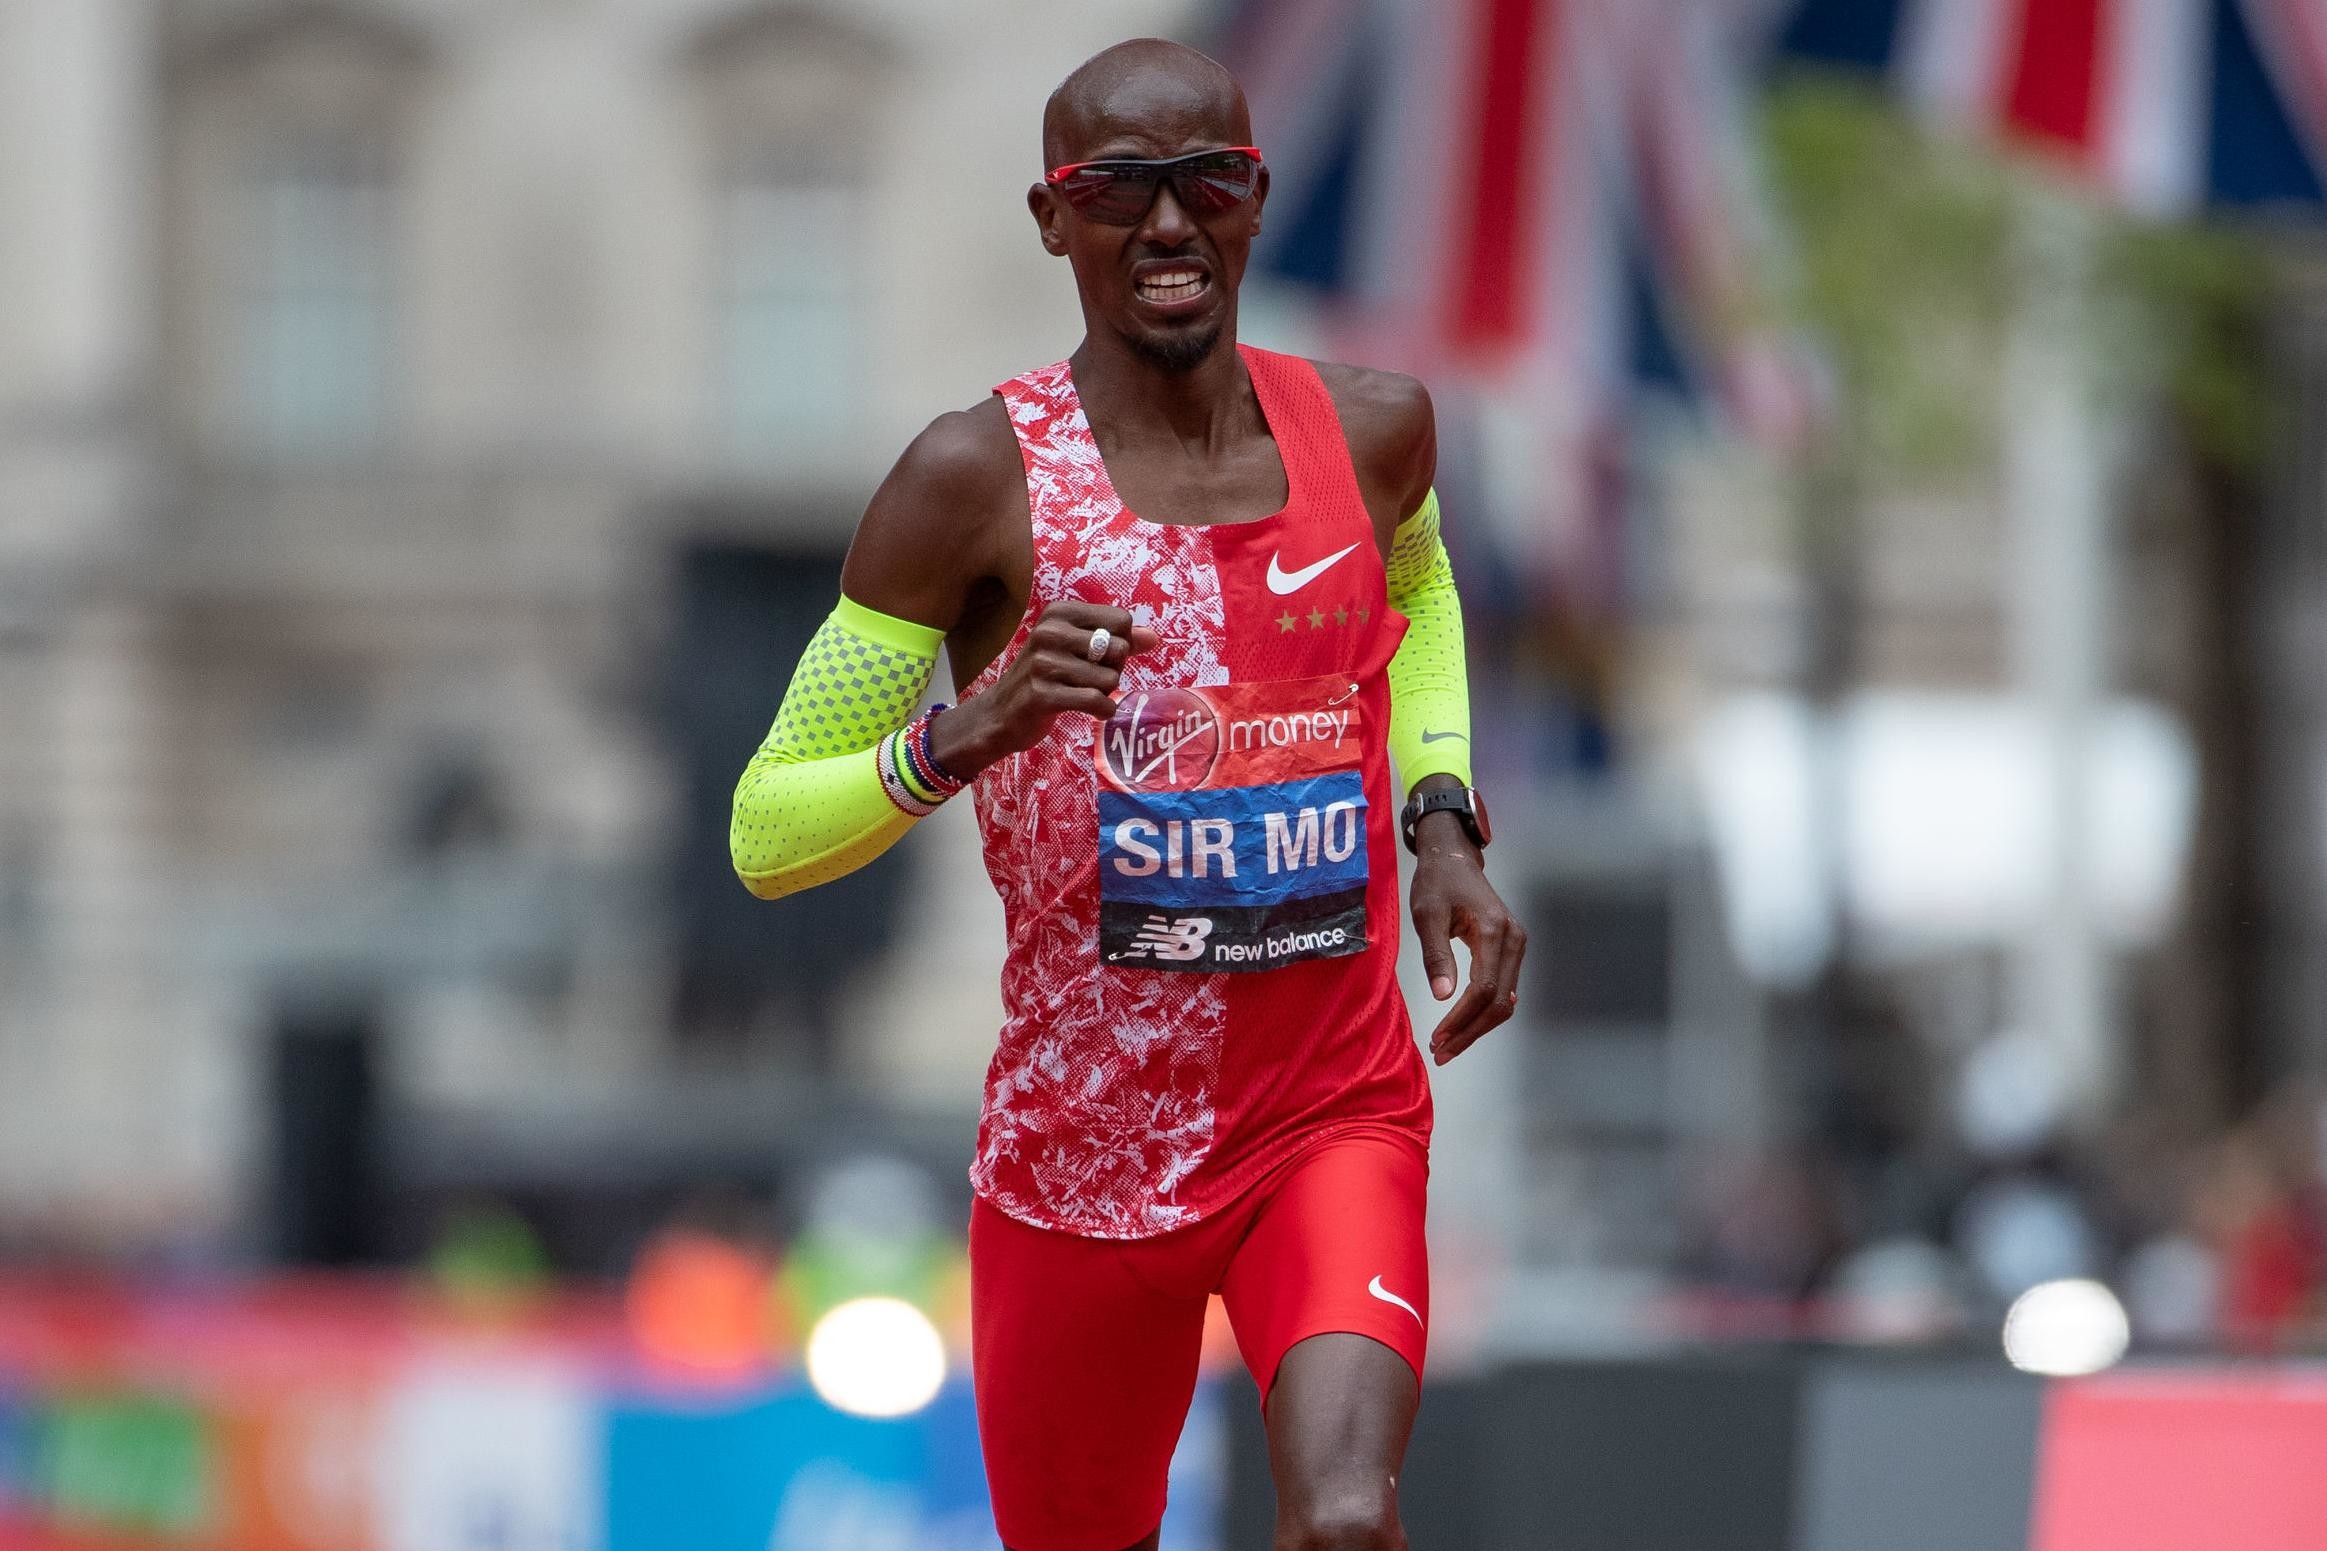 Mo Farah will be the pacemaker for the elite men's race at October's rescheduled London Marathon